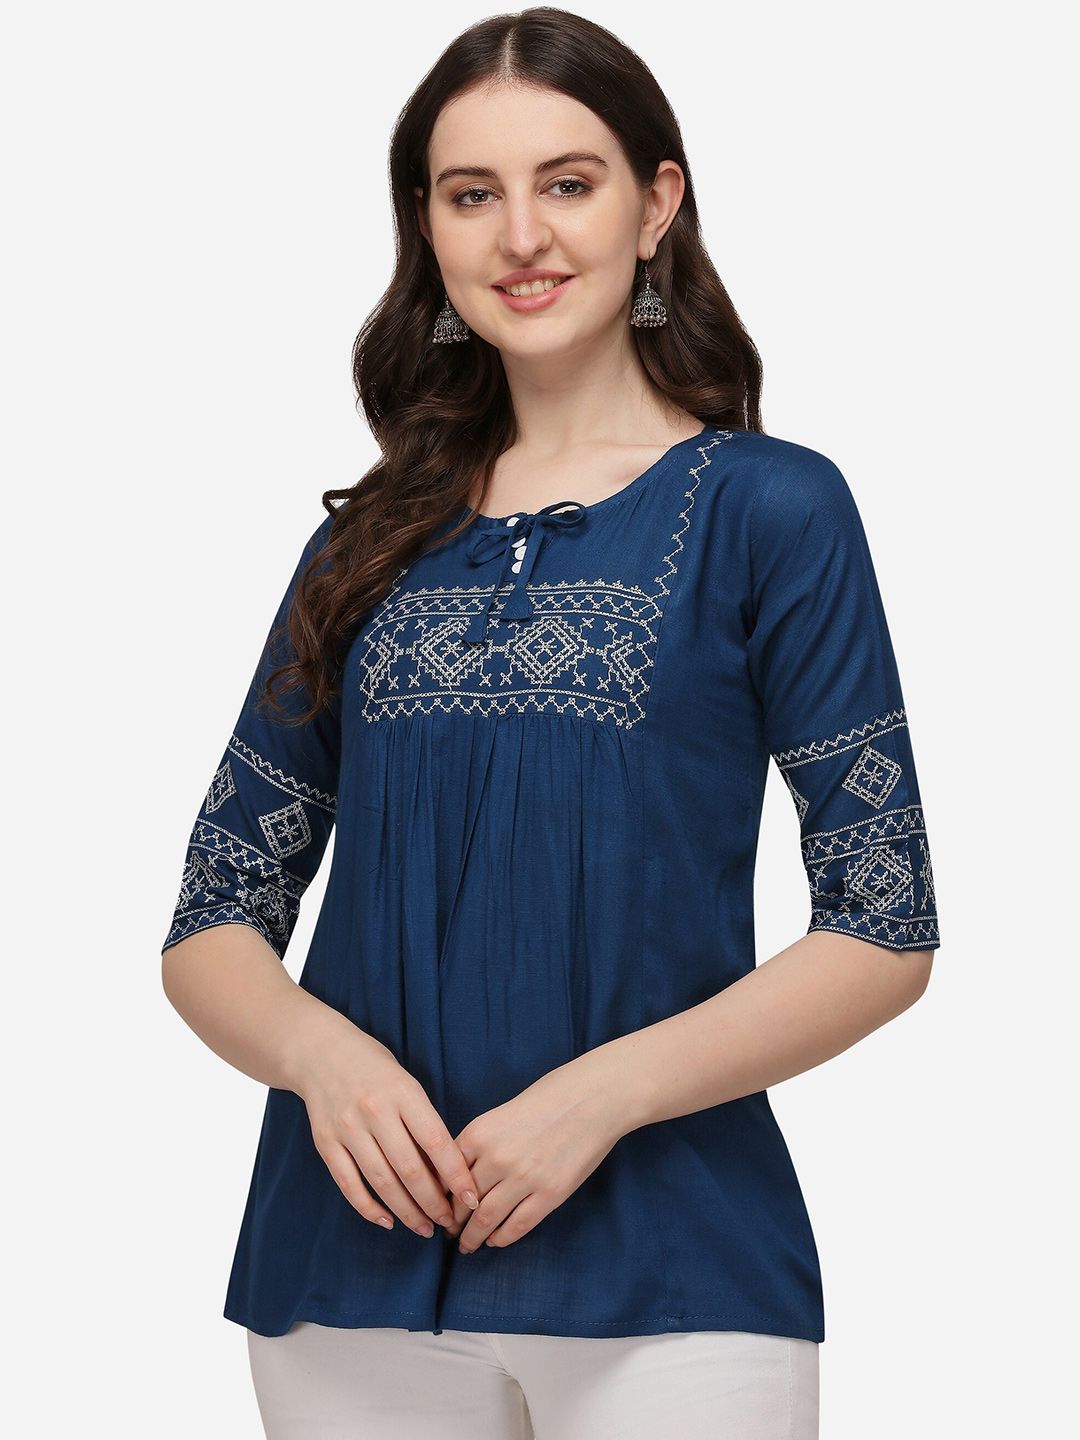 RAJGRANTH Blue & White Floral Embroidered Kurti Price in India